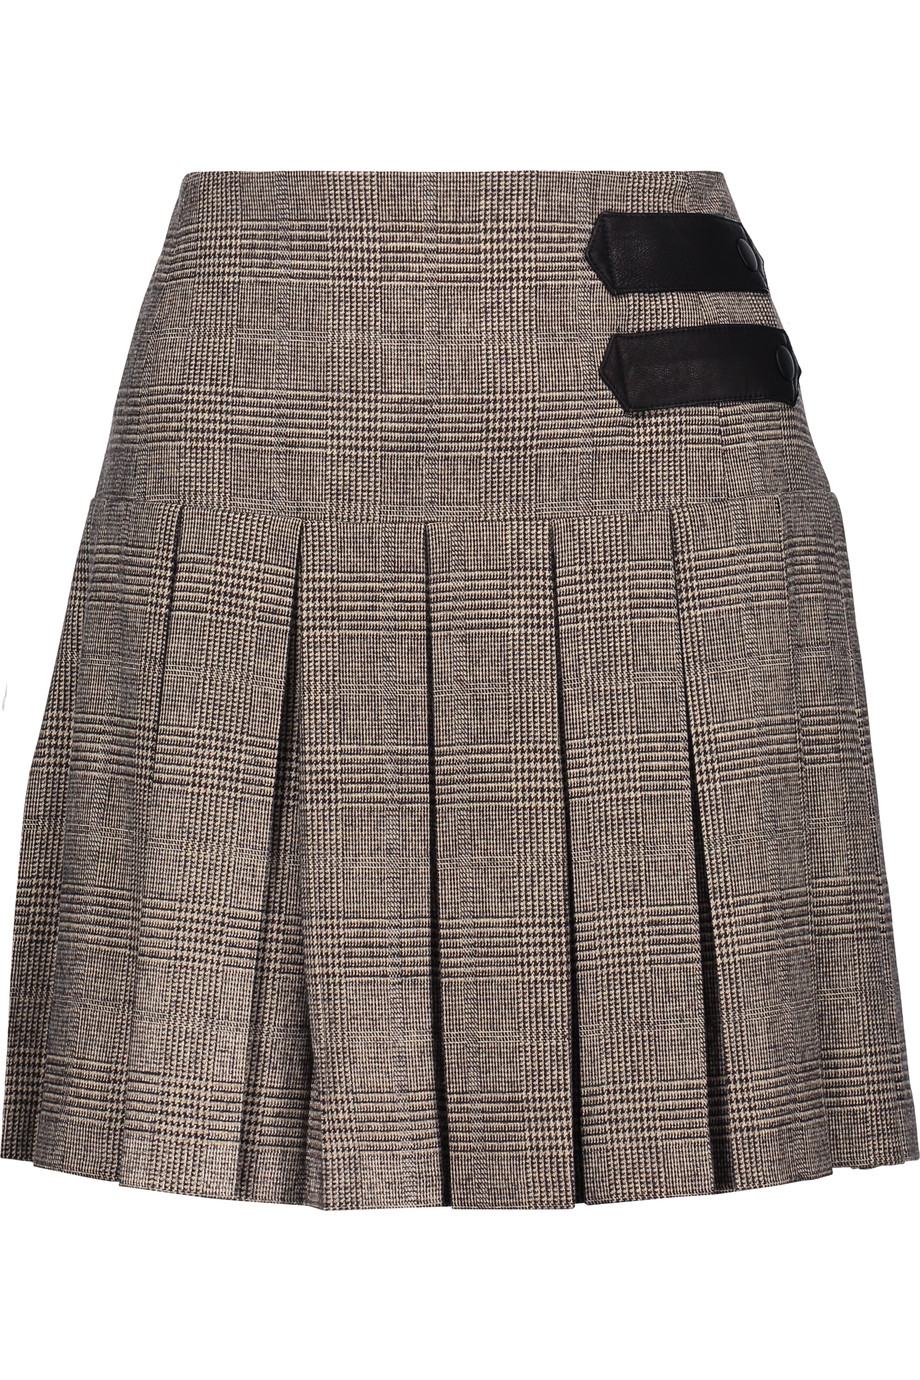 Alice And Olivia Emilie Pleated Leather-trimmed Houndstooth Mini Skirt ...